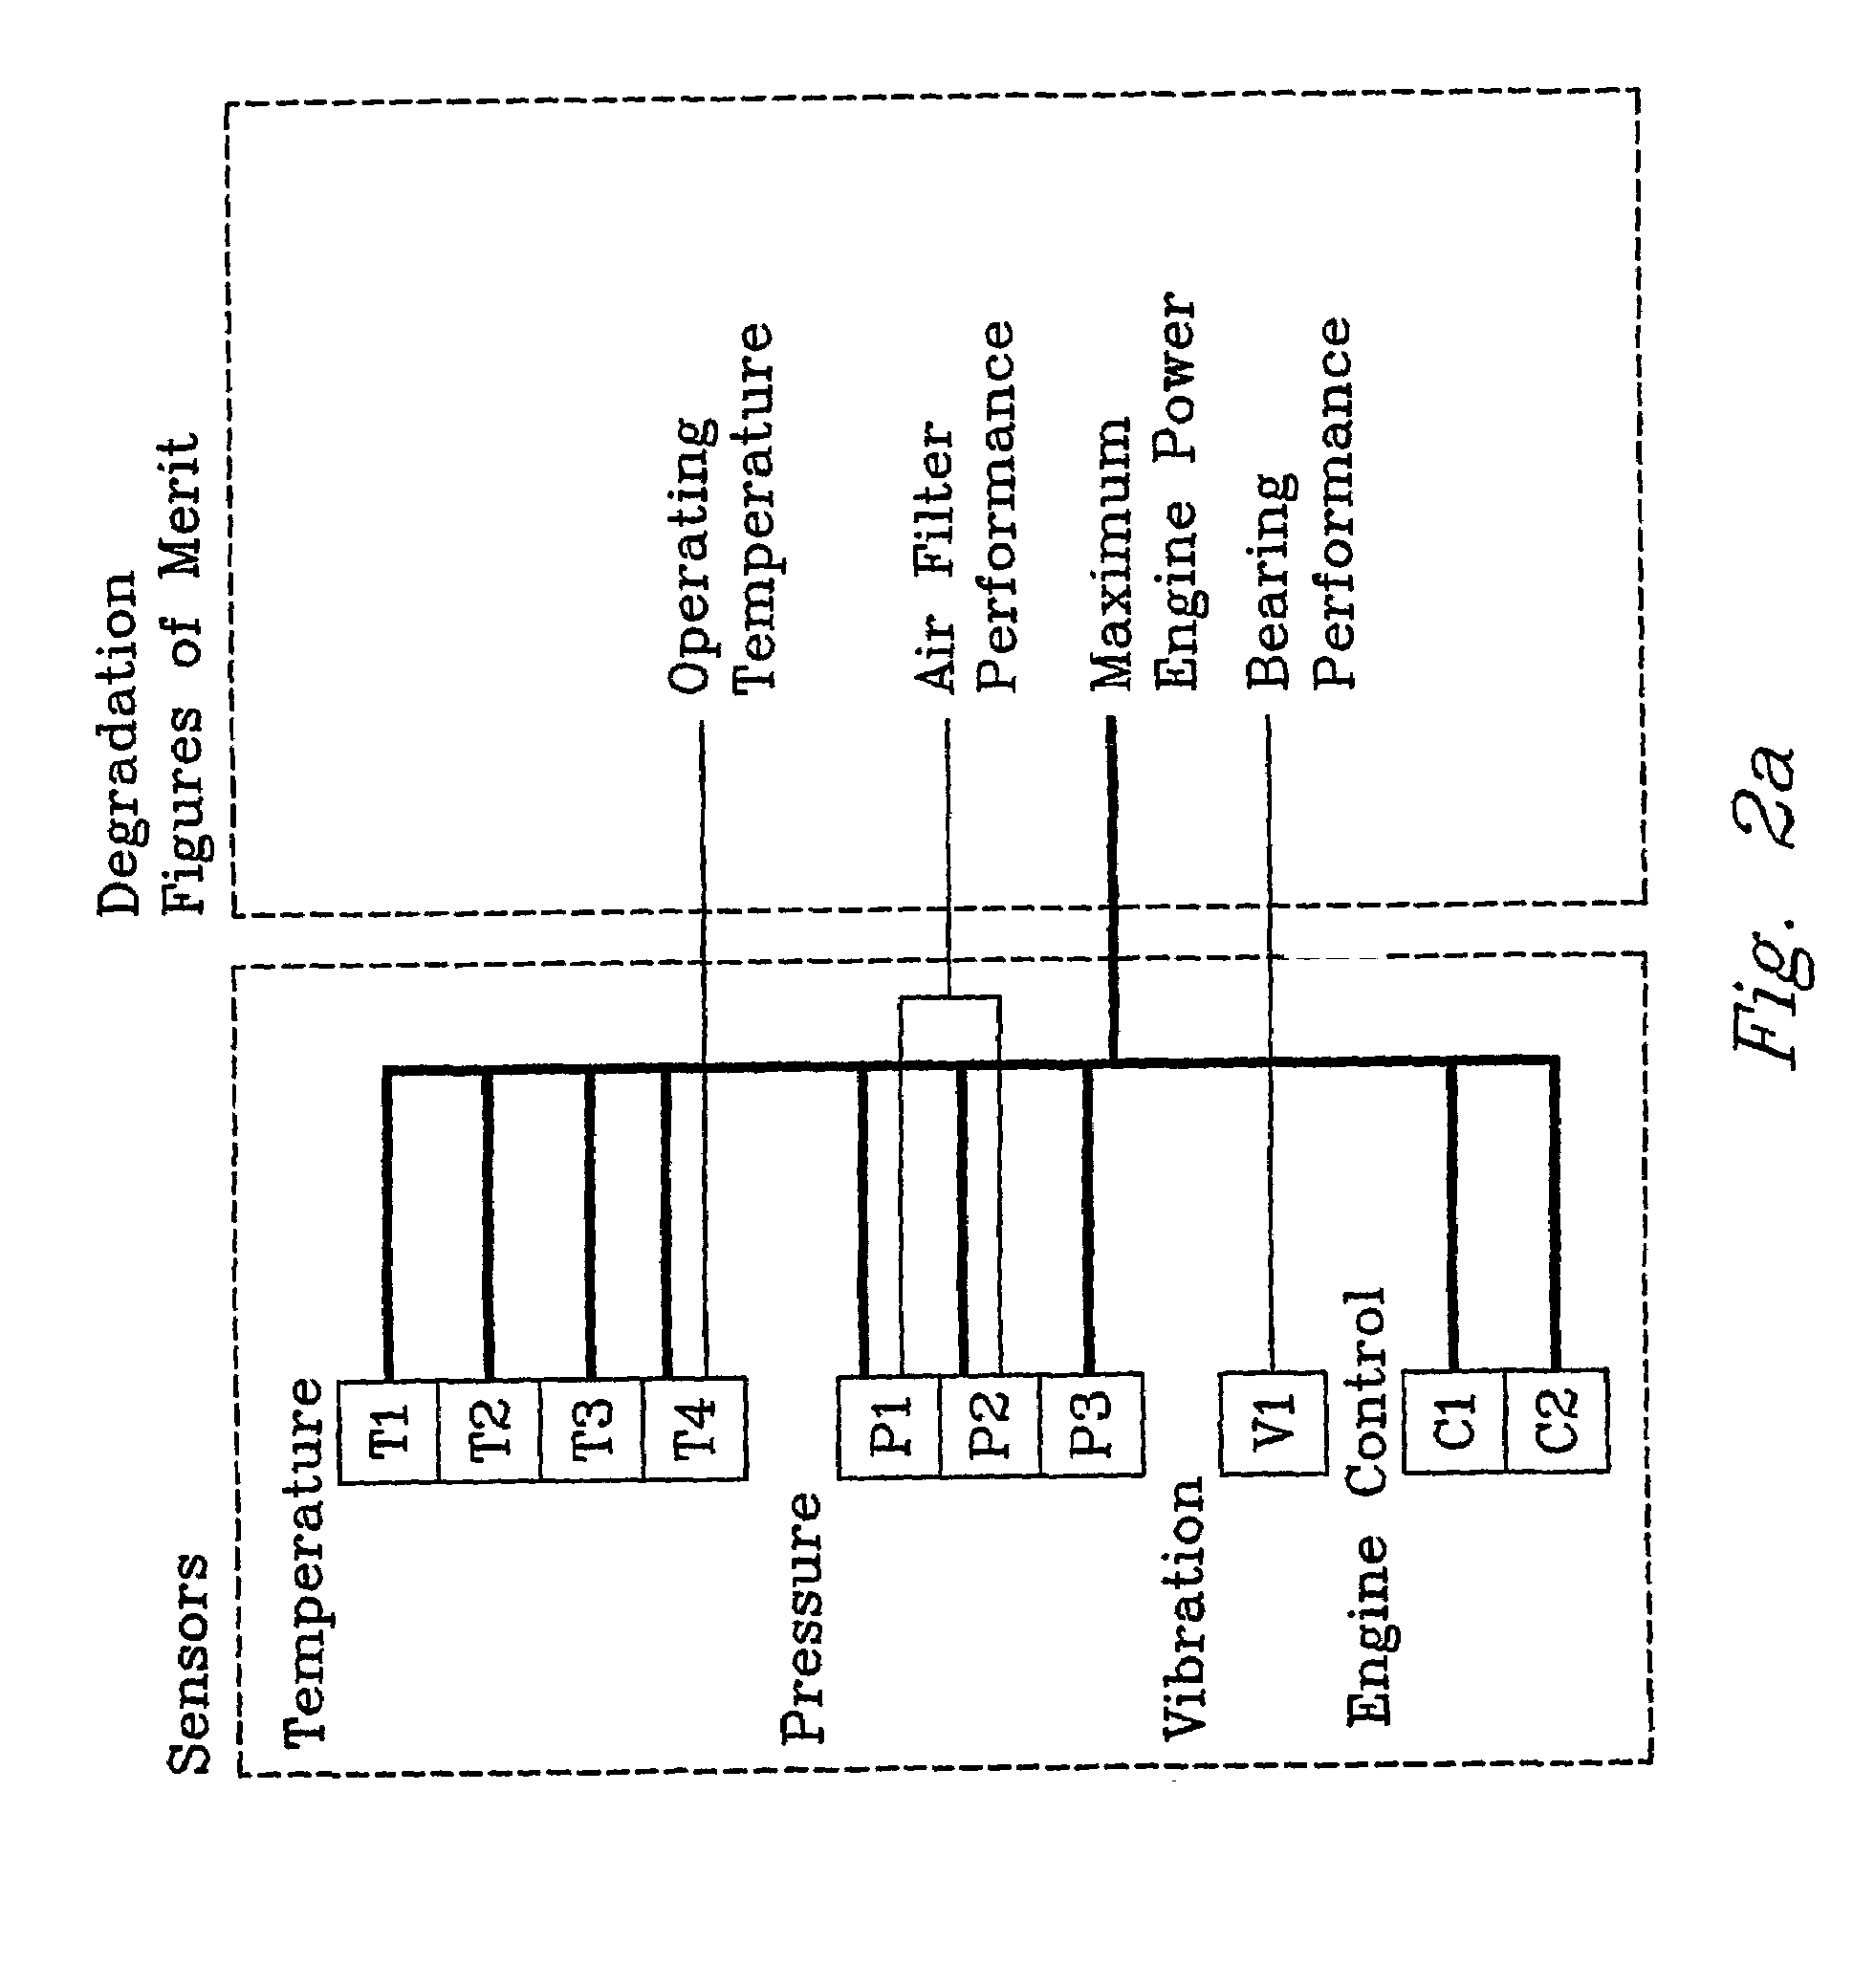 Method and apparatus to predict the remaining service life of an operating system